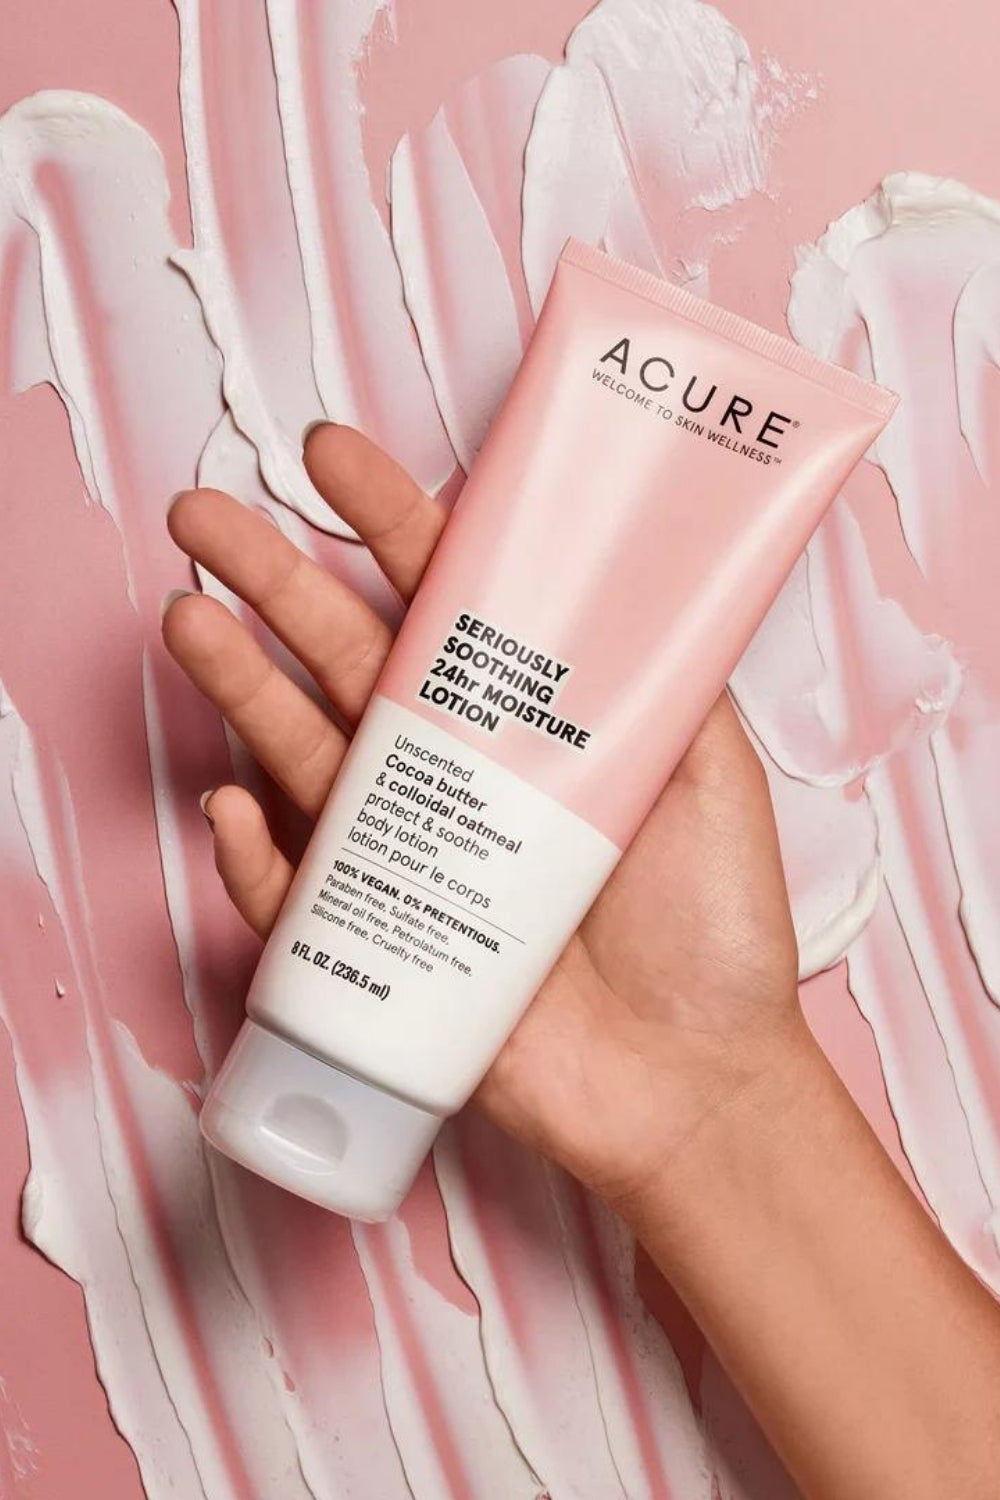 Acure - Seriously Soothing 24Hr Moisture Lotion - 236ml